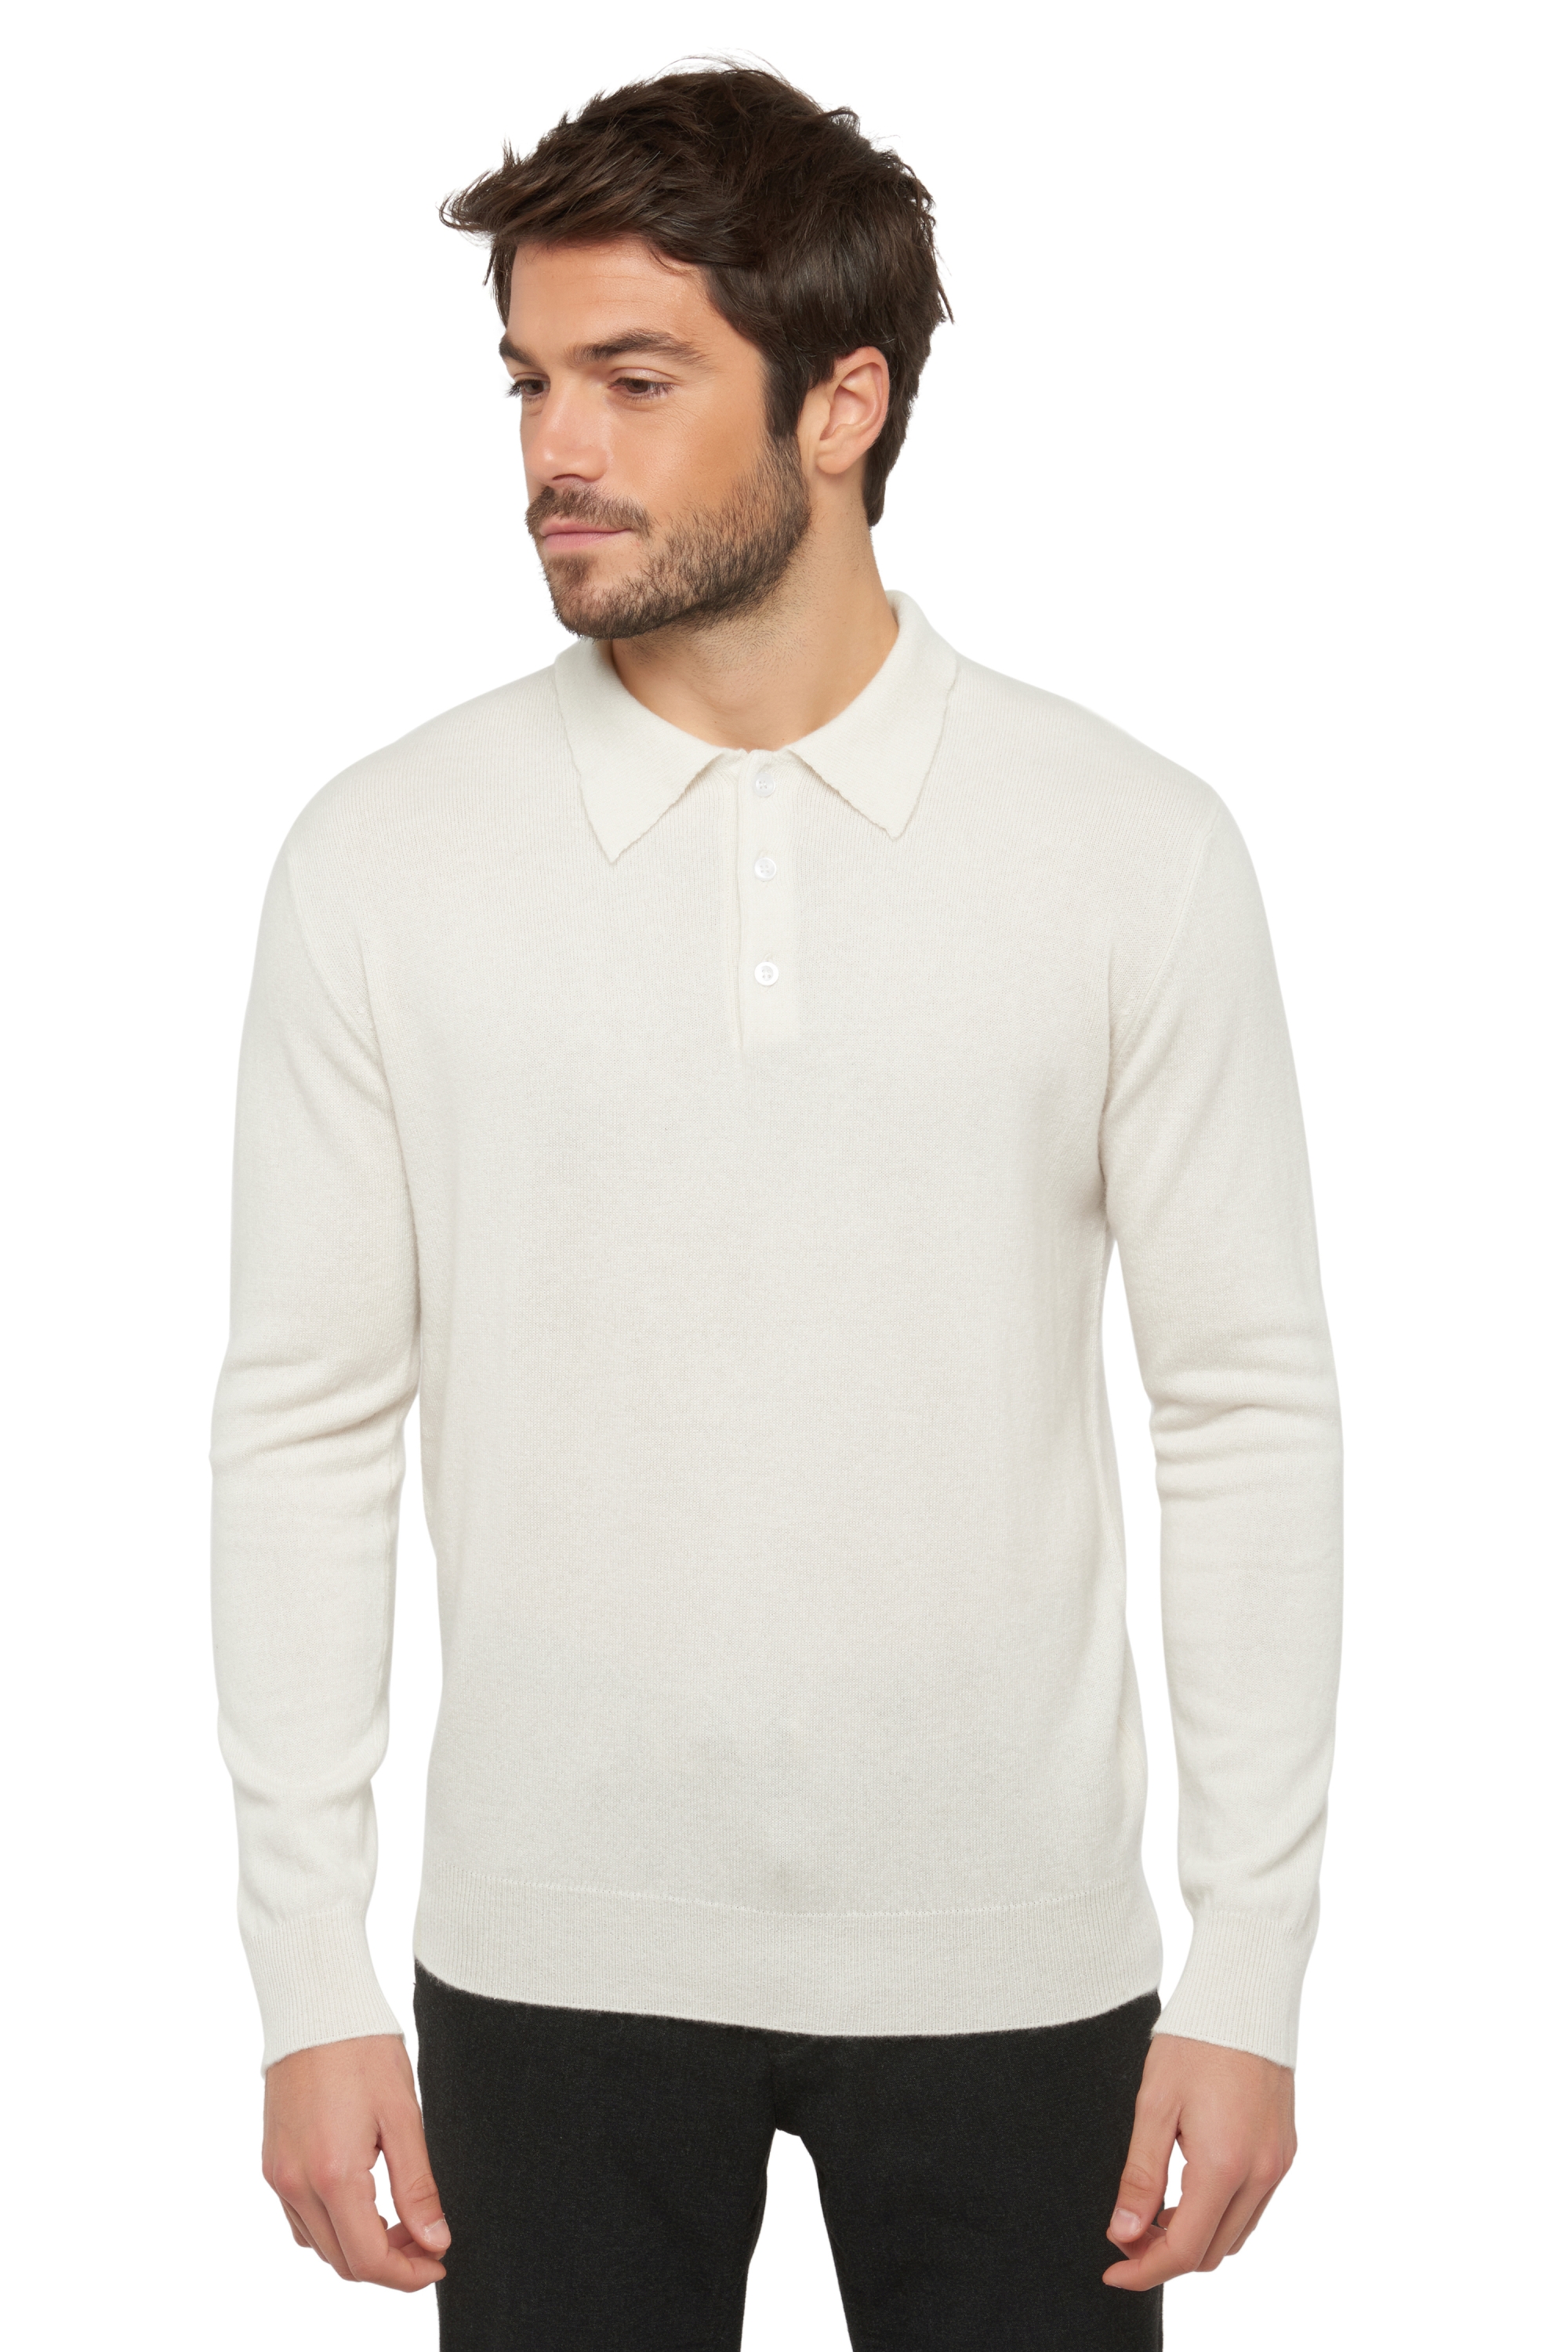 Cashmere men polo style sweaters alexandre off white 2xl